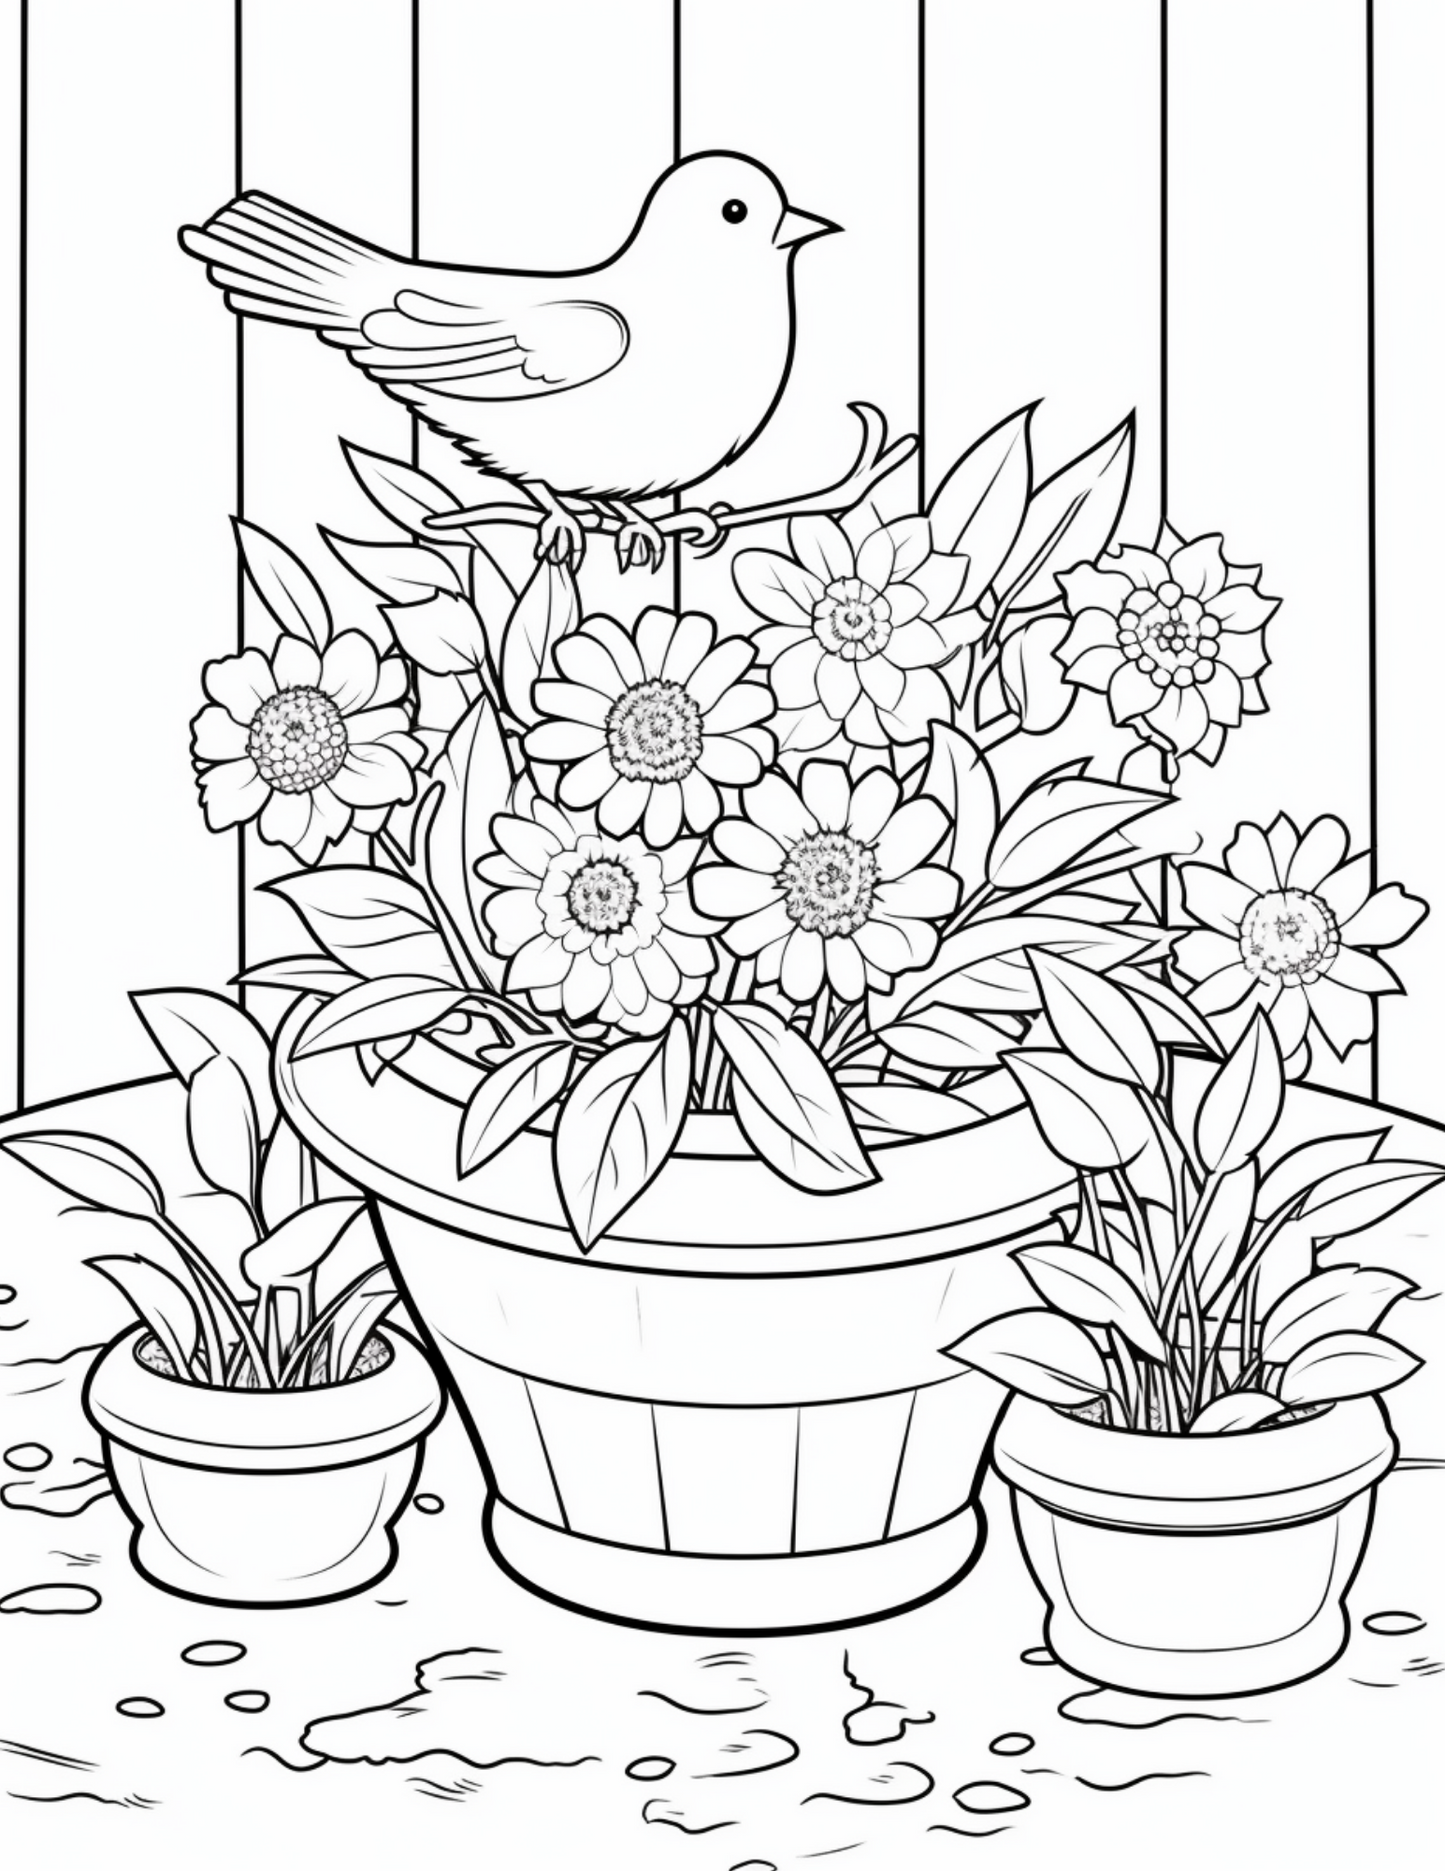 flowers in a garden container coloring pages, birds coloring pages